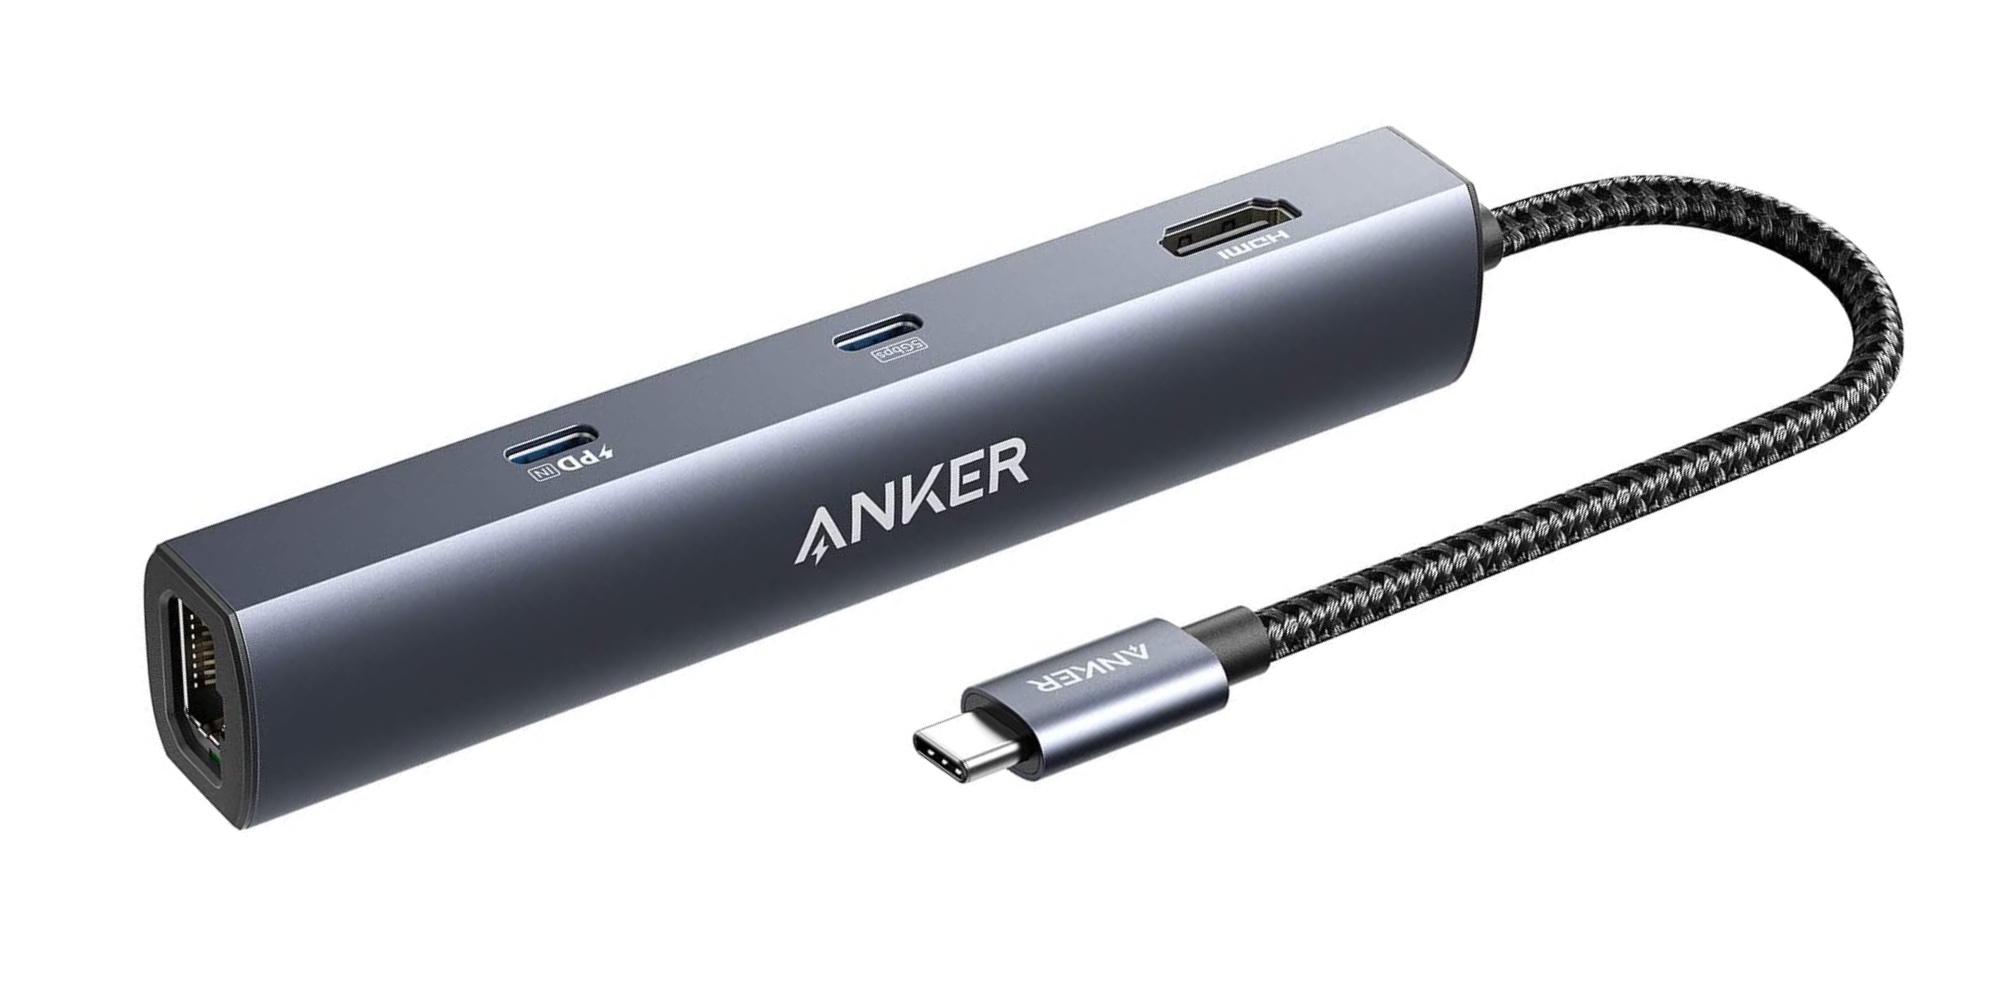 Outfit your M2 MacBook Air with Anker USB-C hubs on sale from $21 at